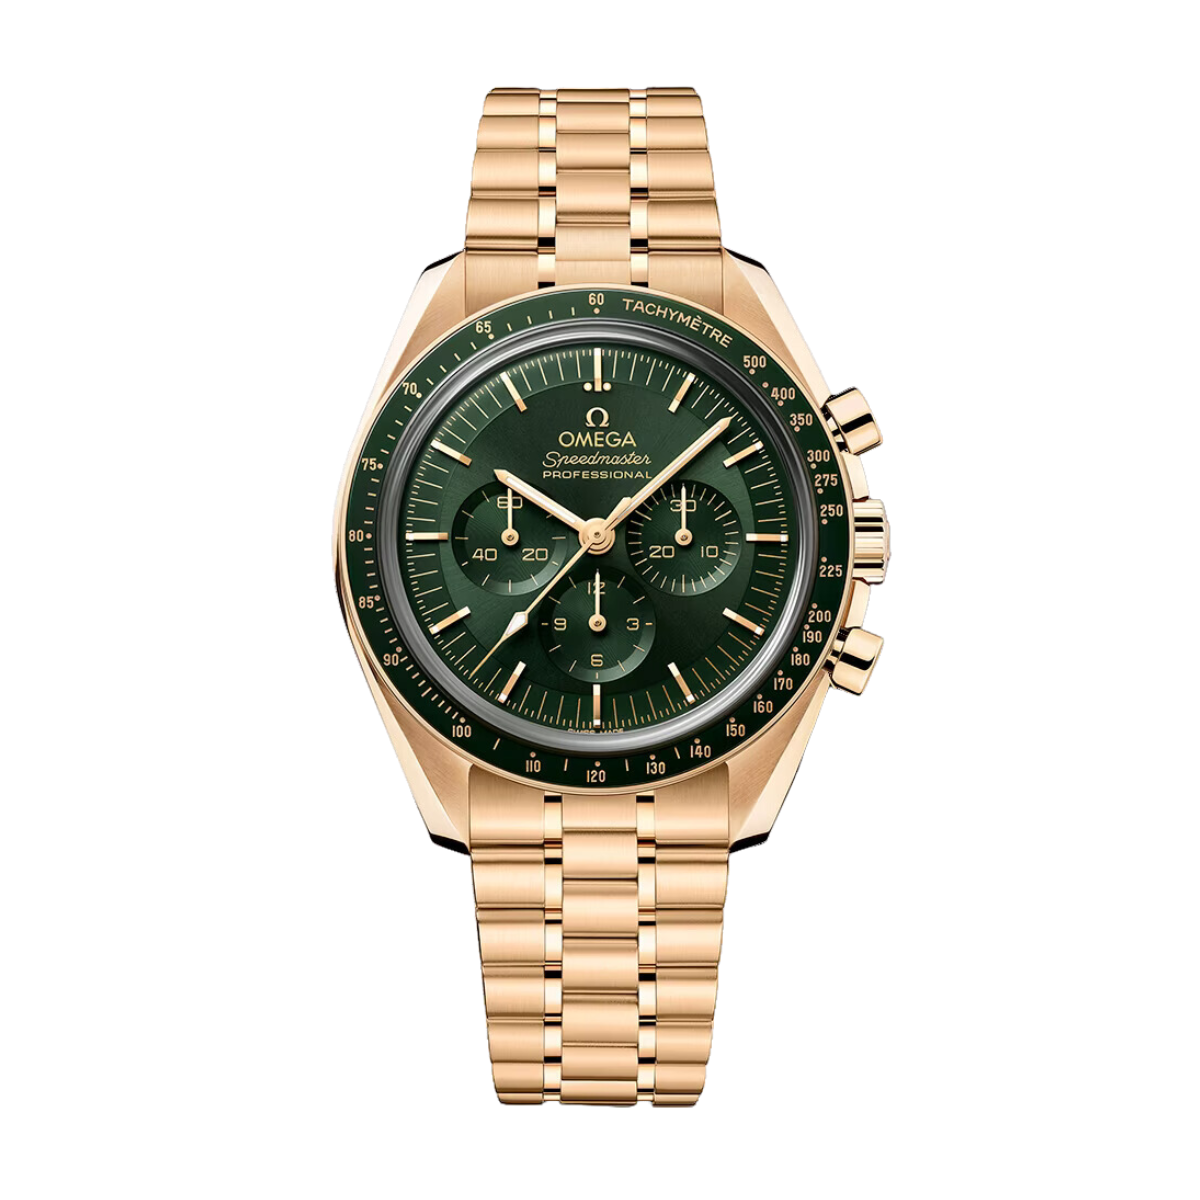 OMEGA Speedmaster Moonwatch Professional Co-Axial Master Chronometer Chronograph 42 mm - Front